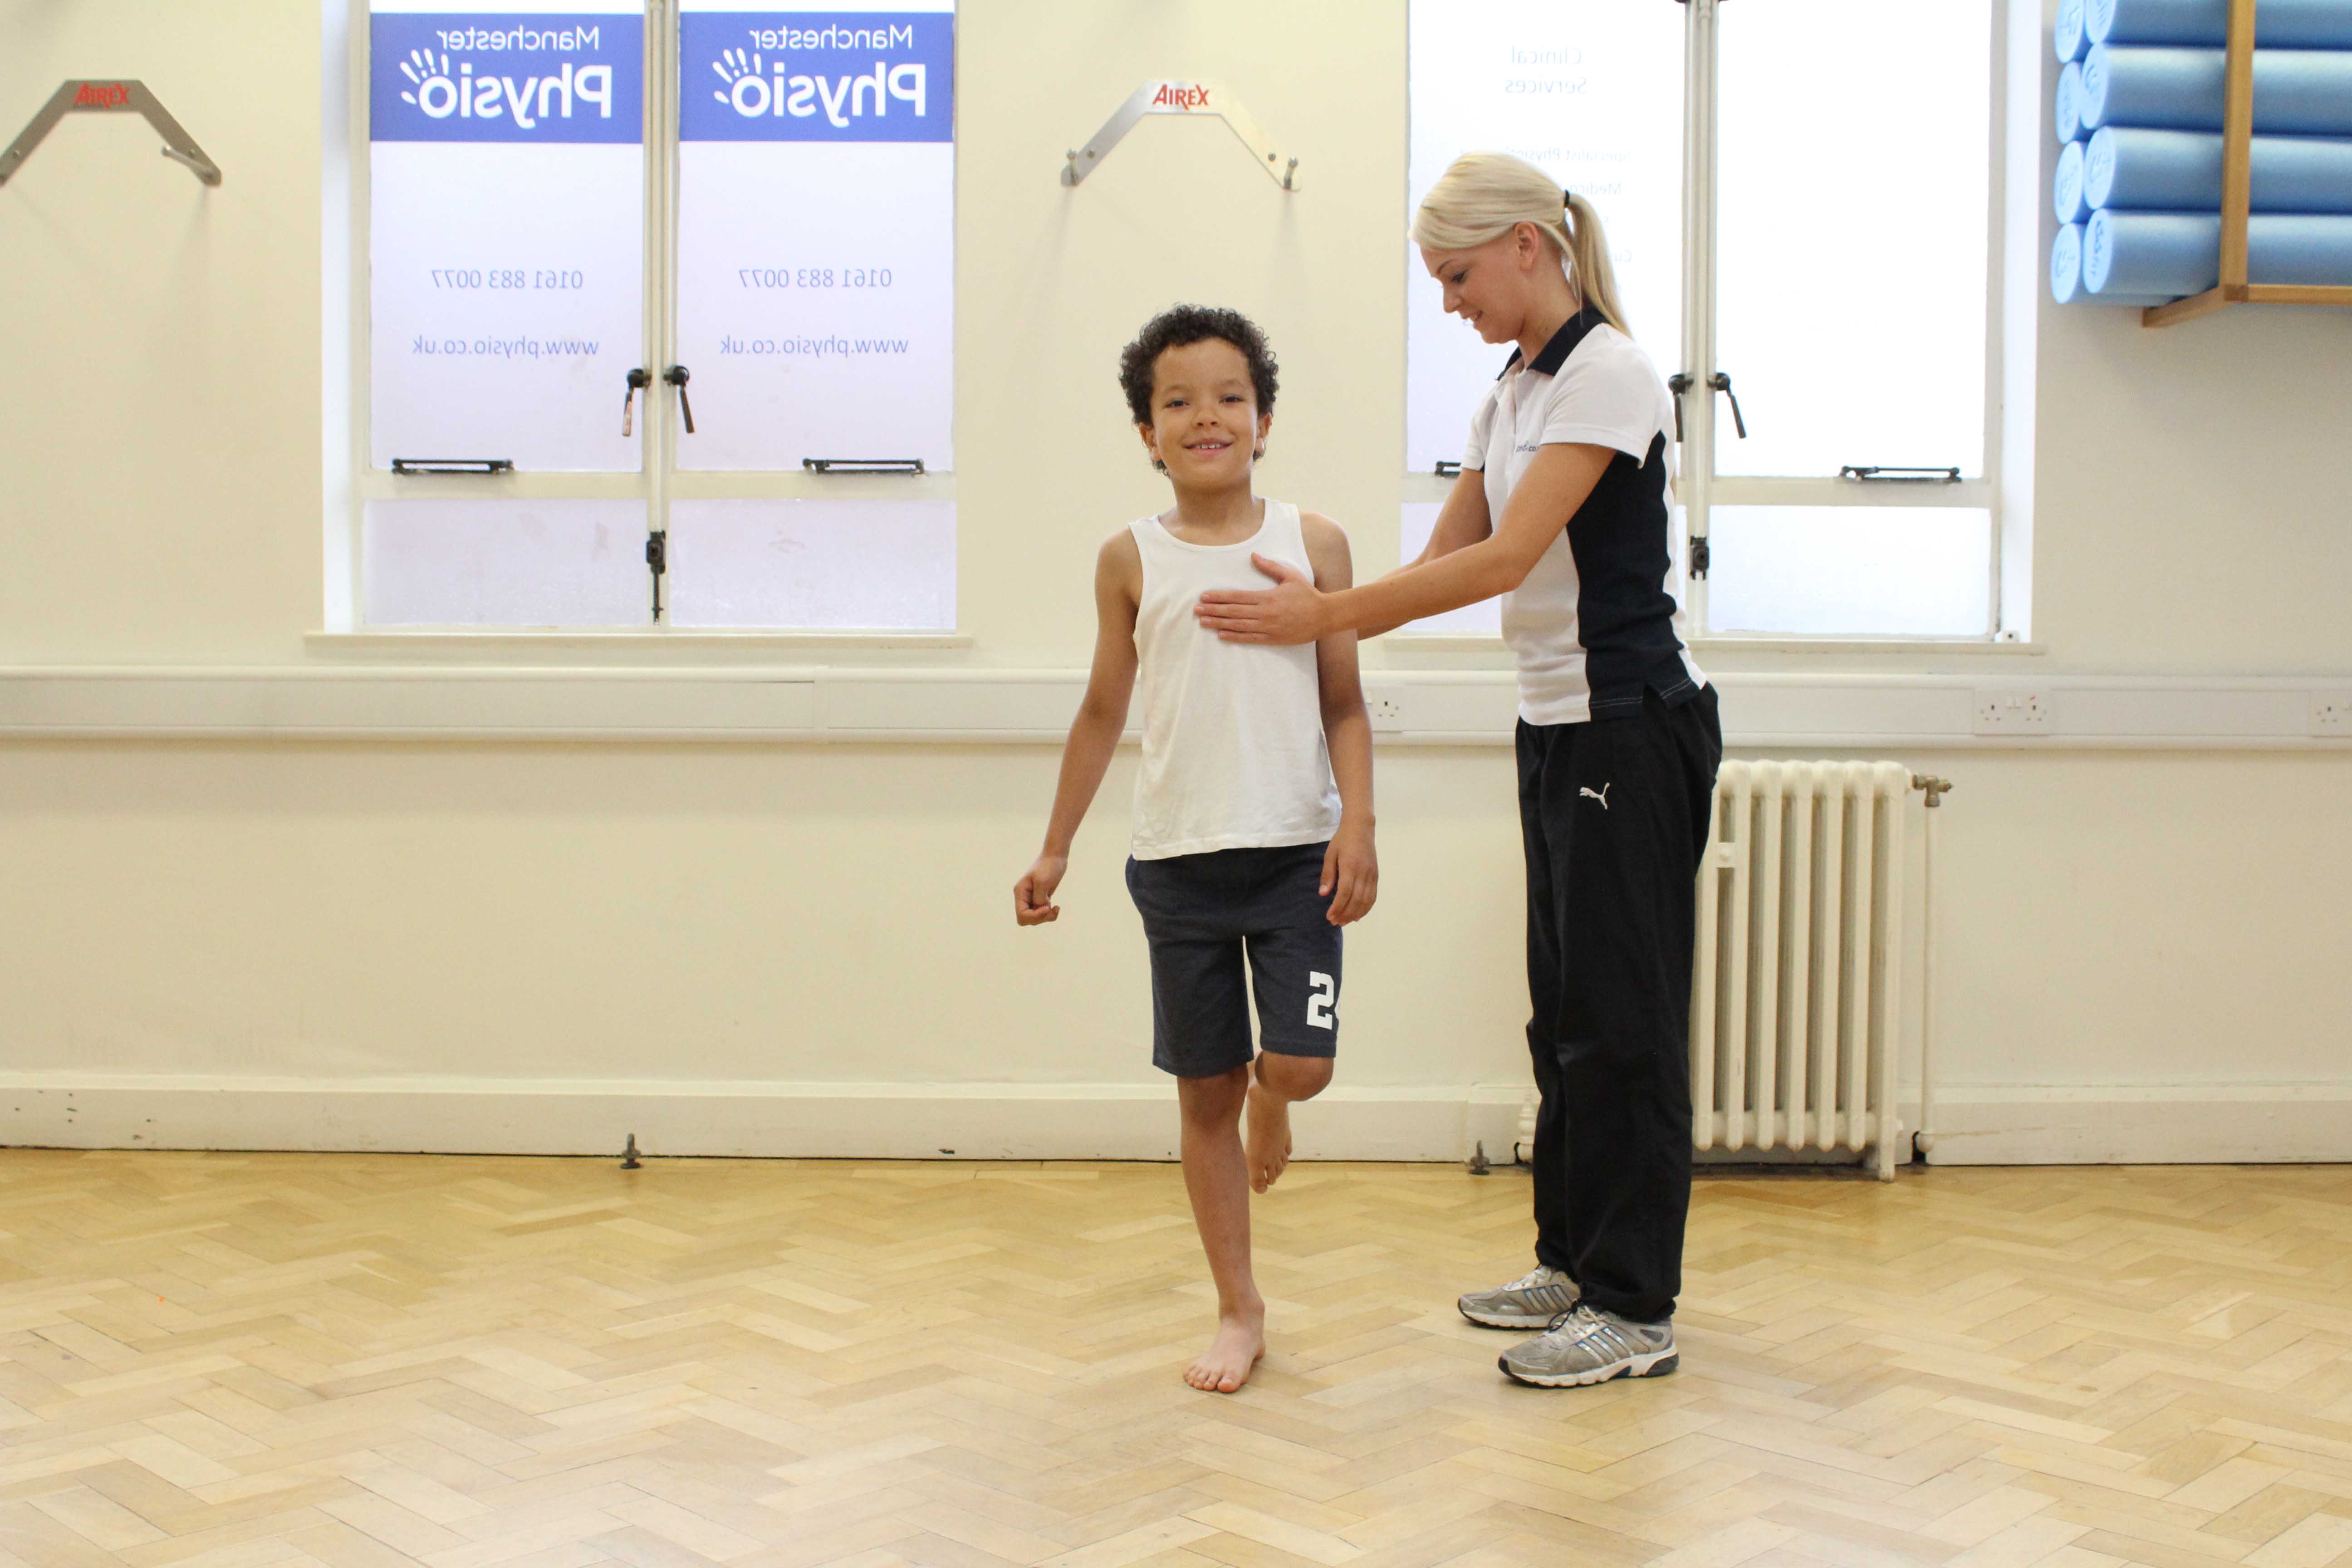 Balance and stability exercises supervised by experienced paediatric physiotherapist